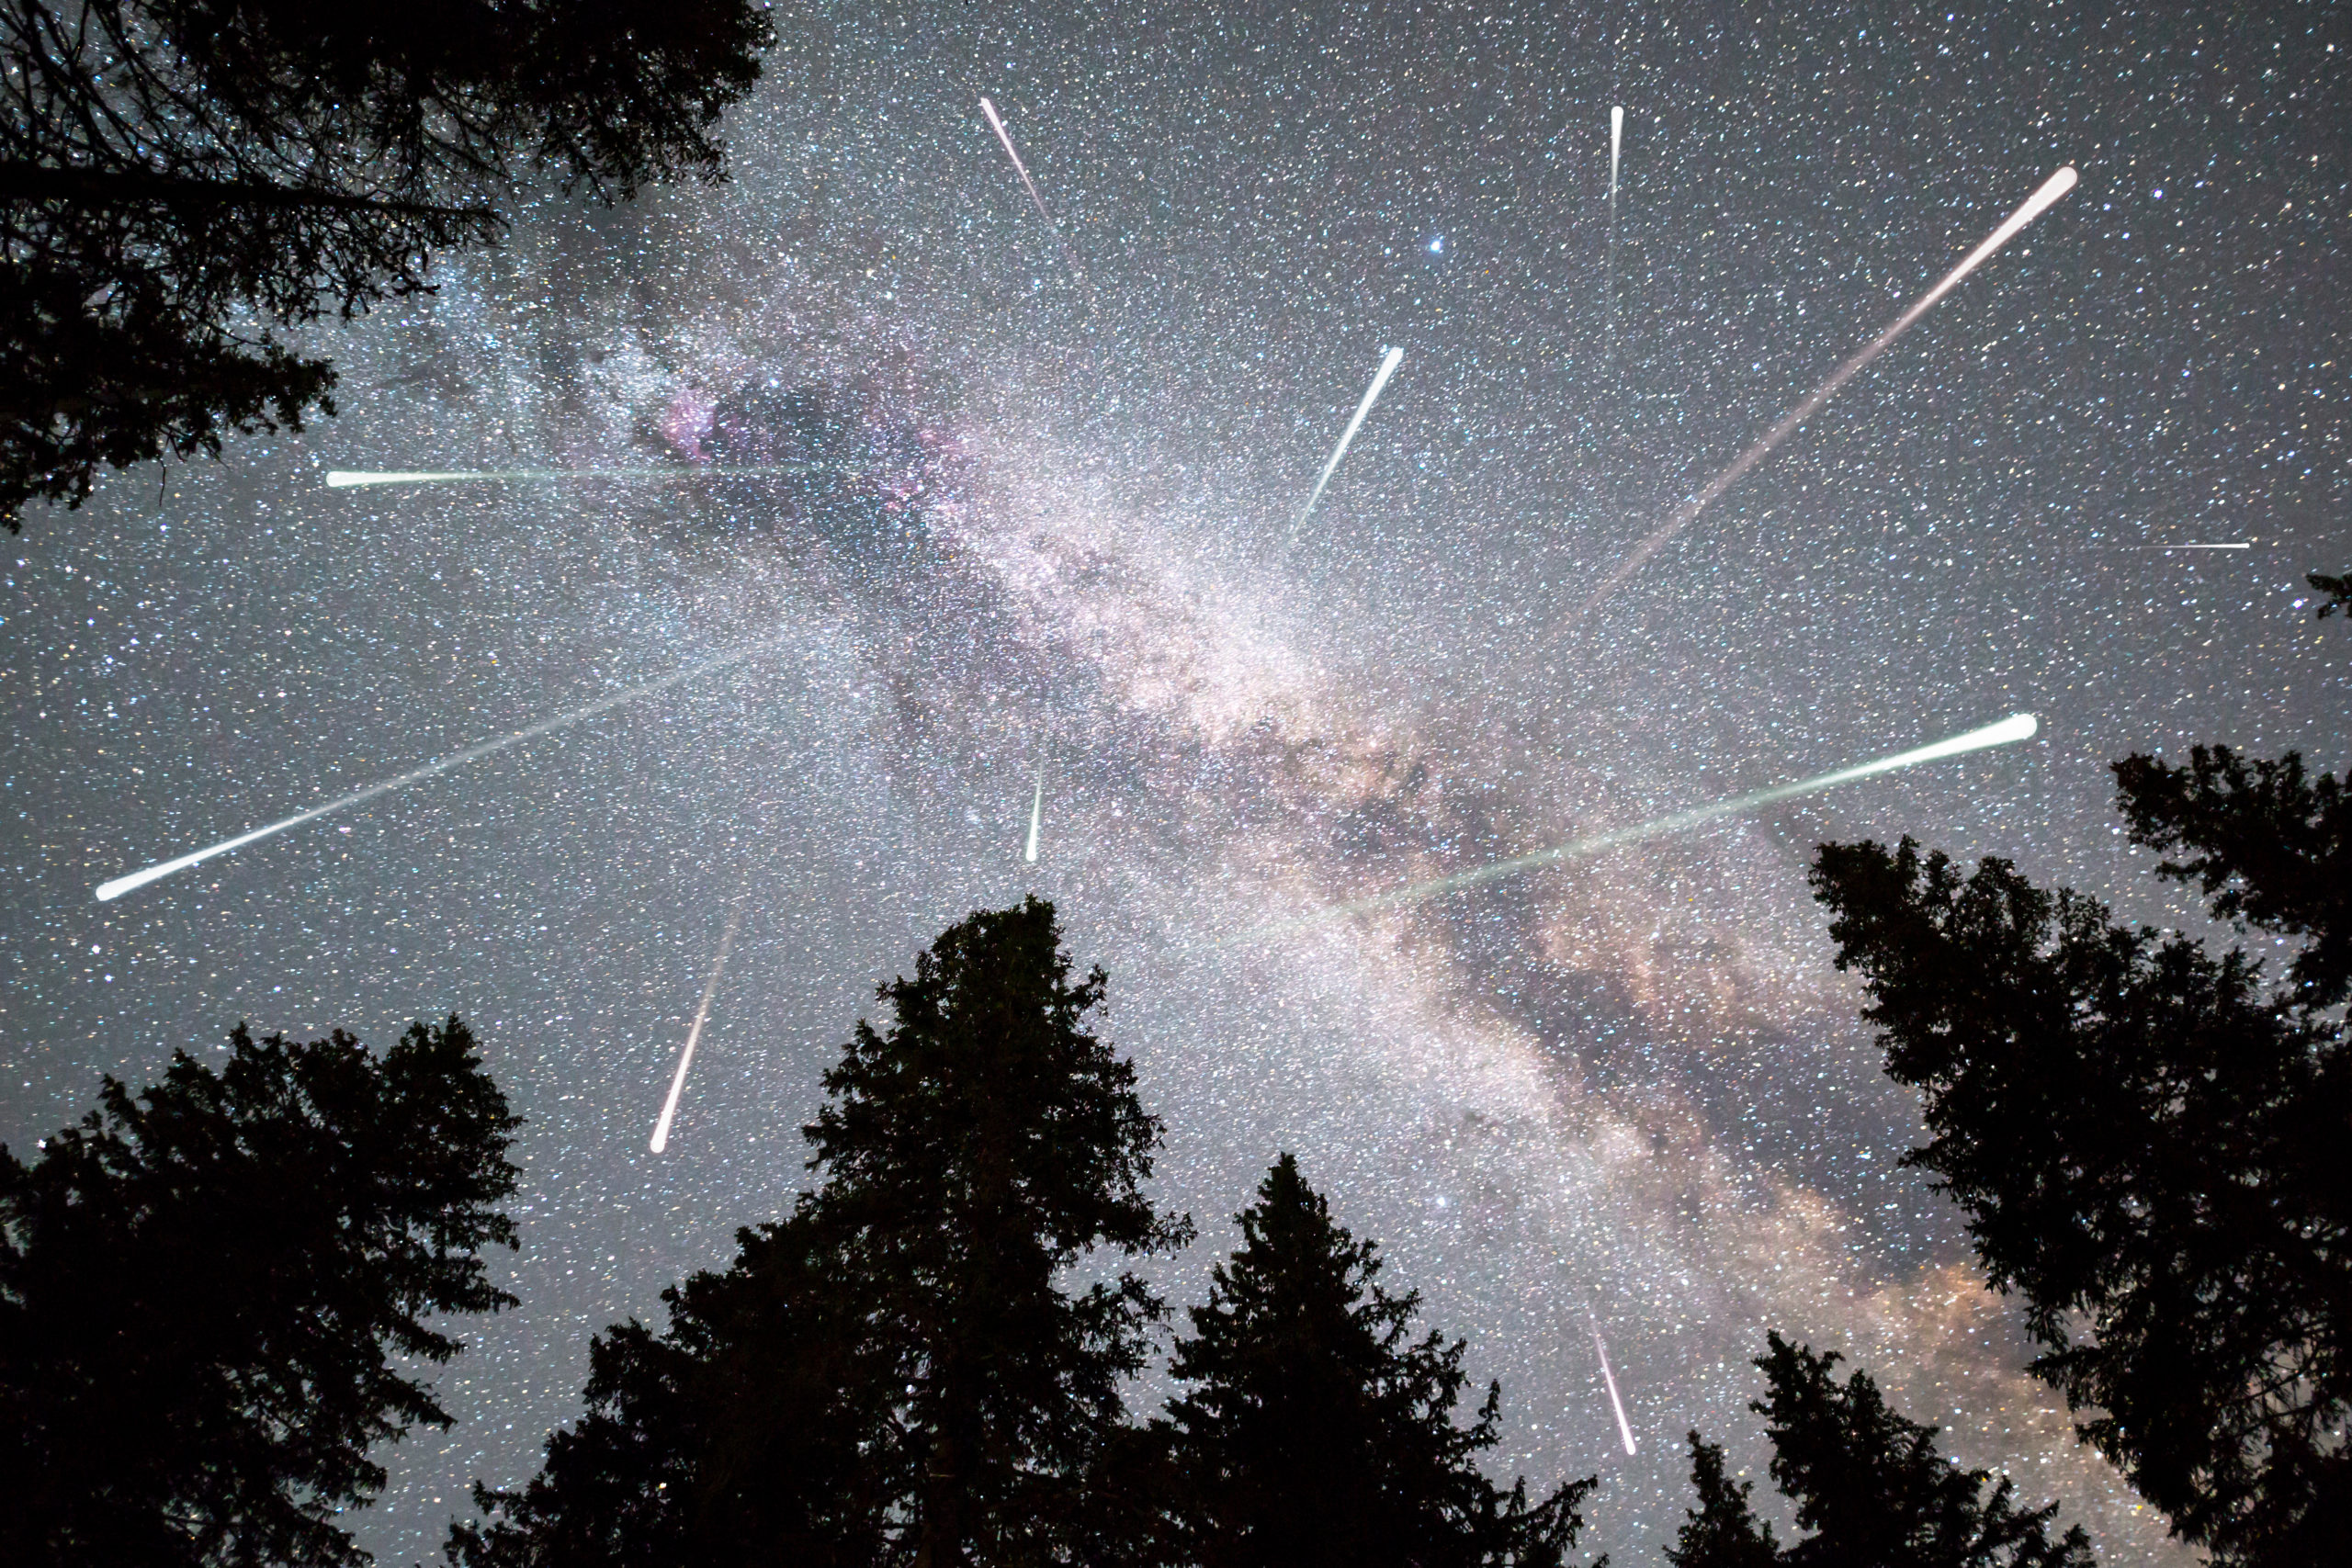 How to View the Perseid Meteor Shower This Week